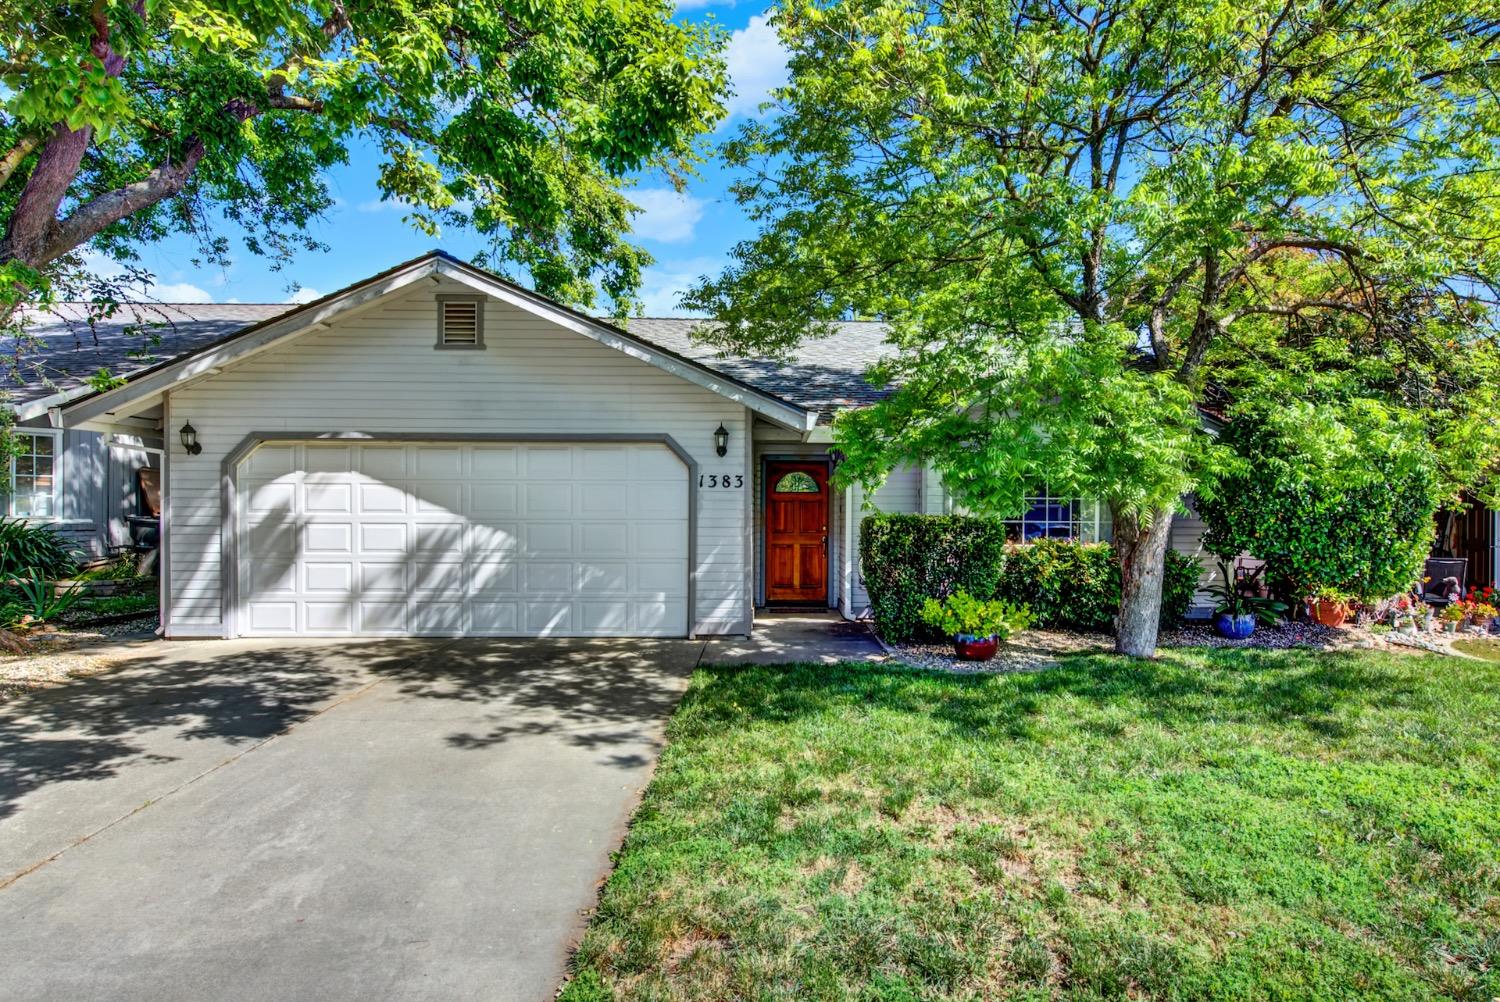 Photo of 1383 Garfield Pl in Woodland, CA